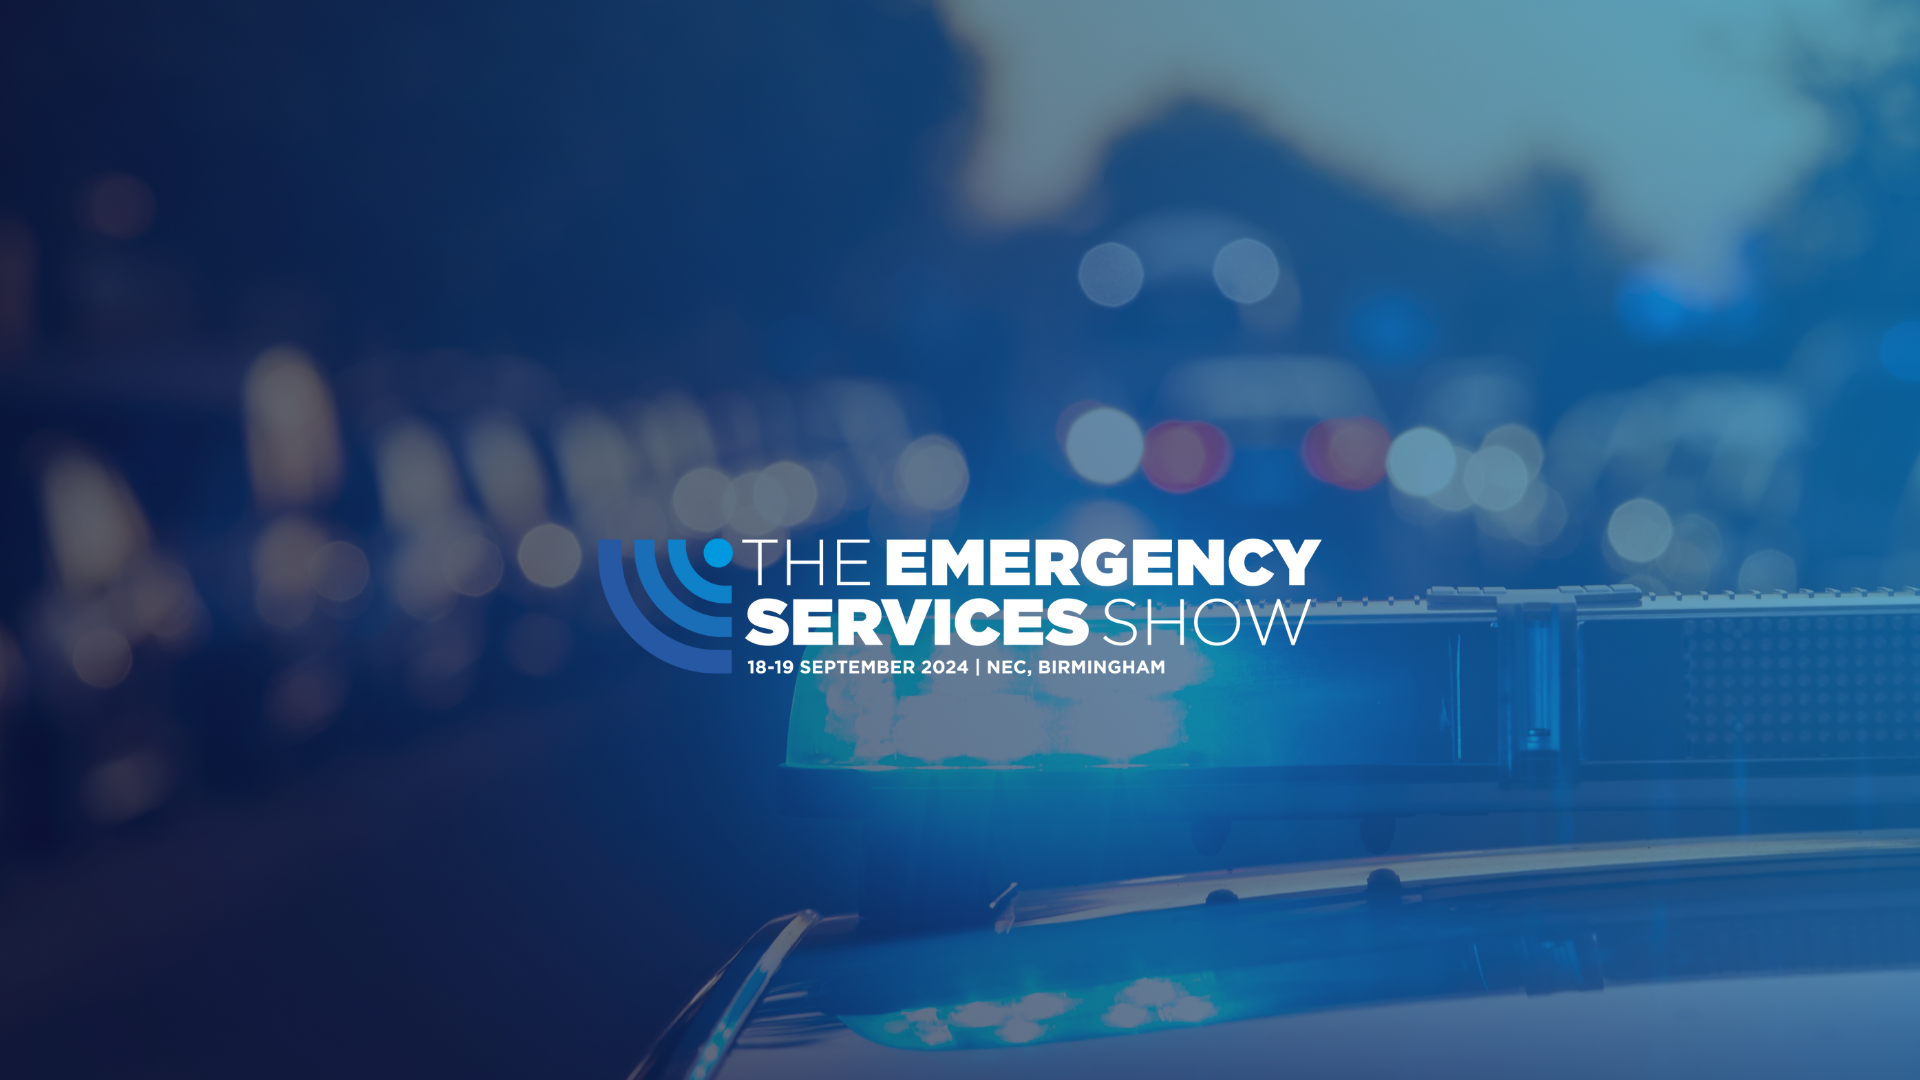 Welcome to The Emergency Services Show